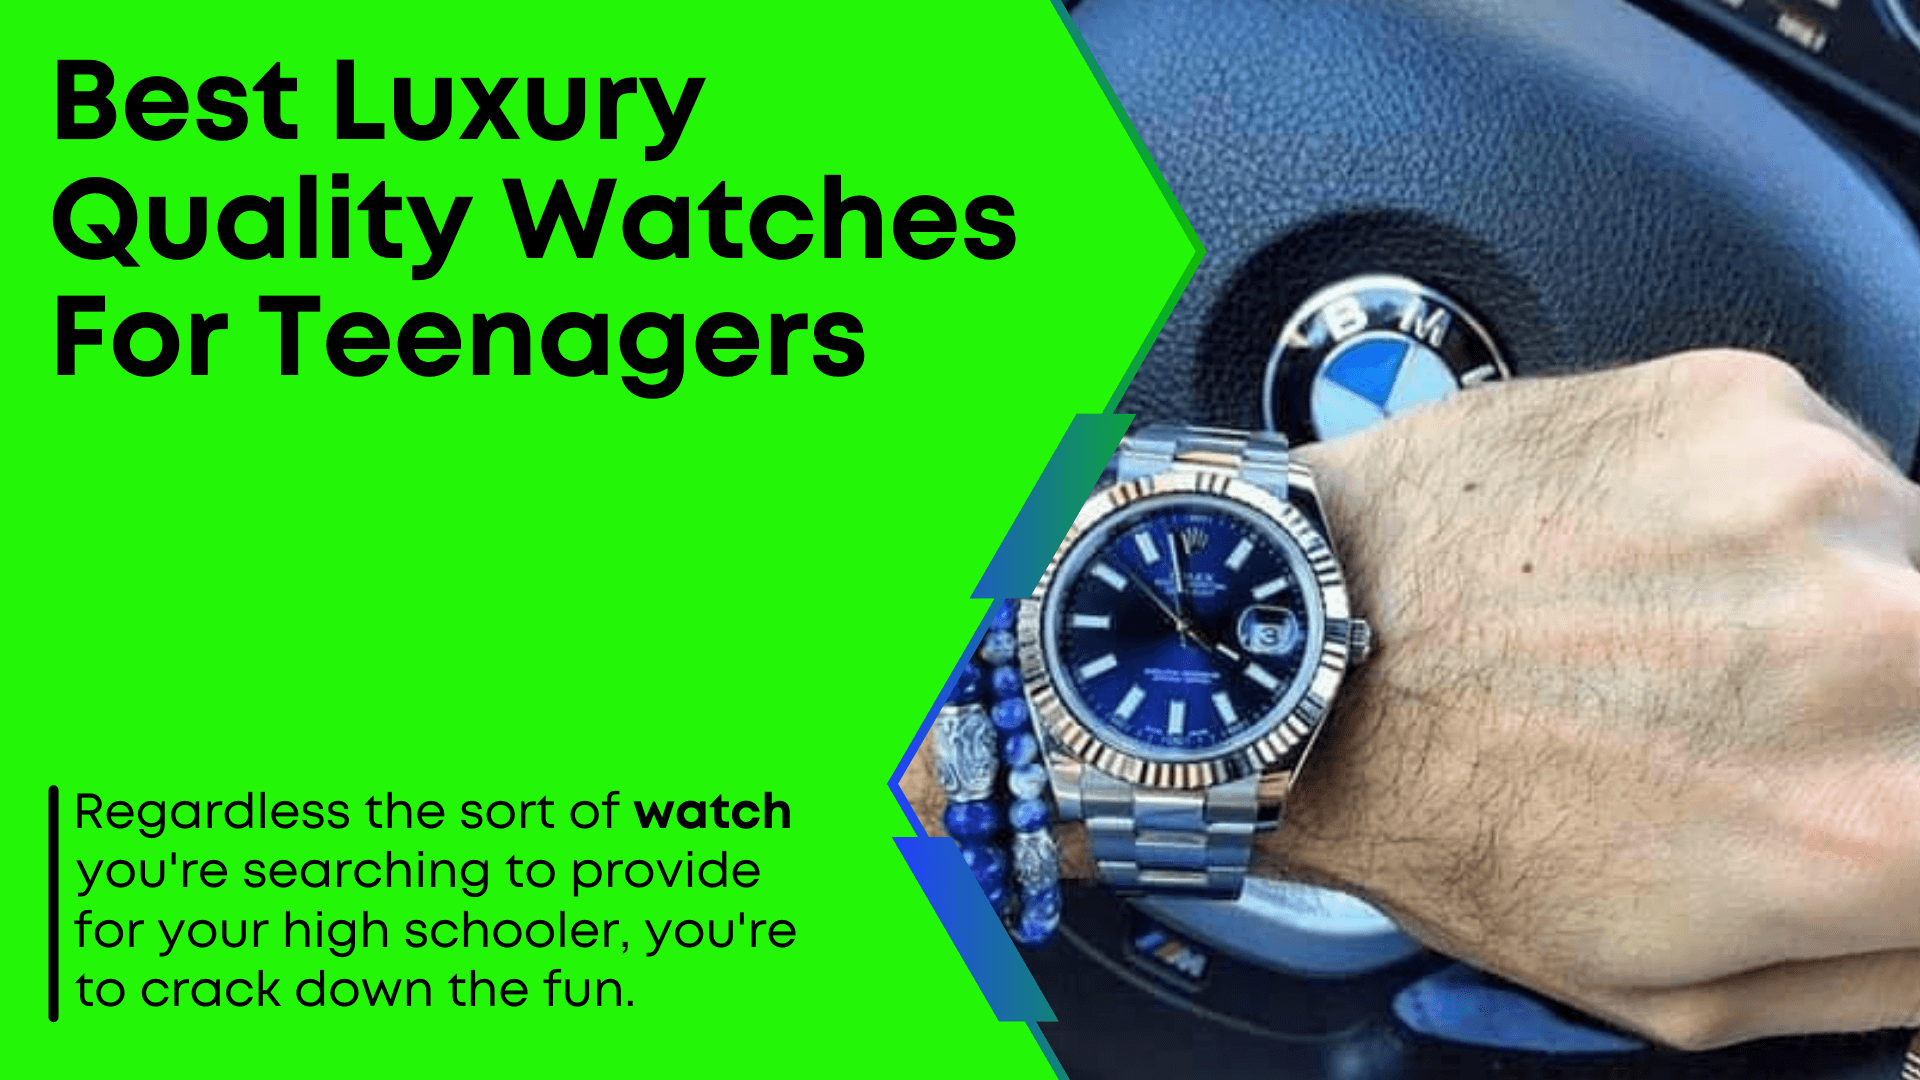 25 Best Luxury Quality Watches For Teenagers